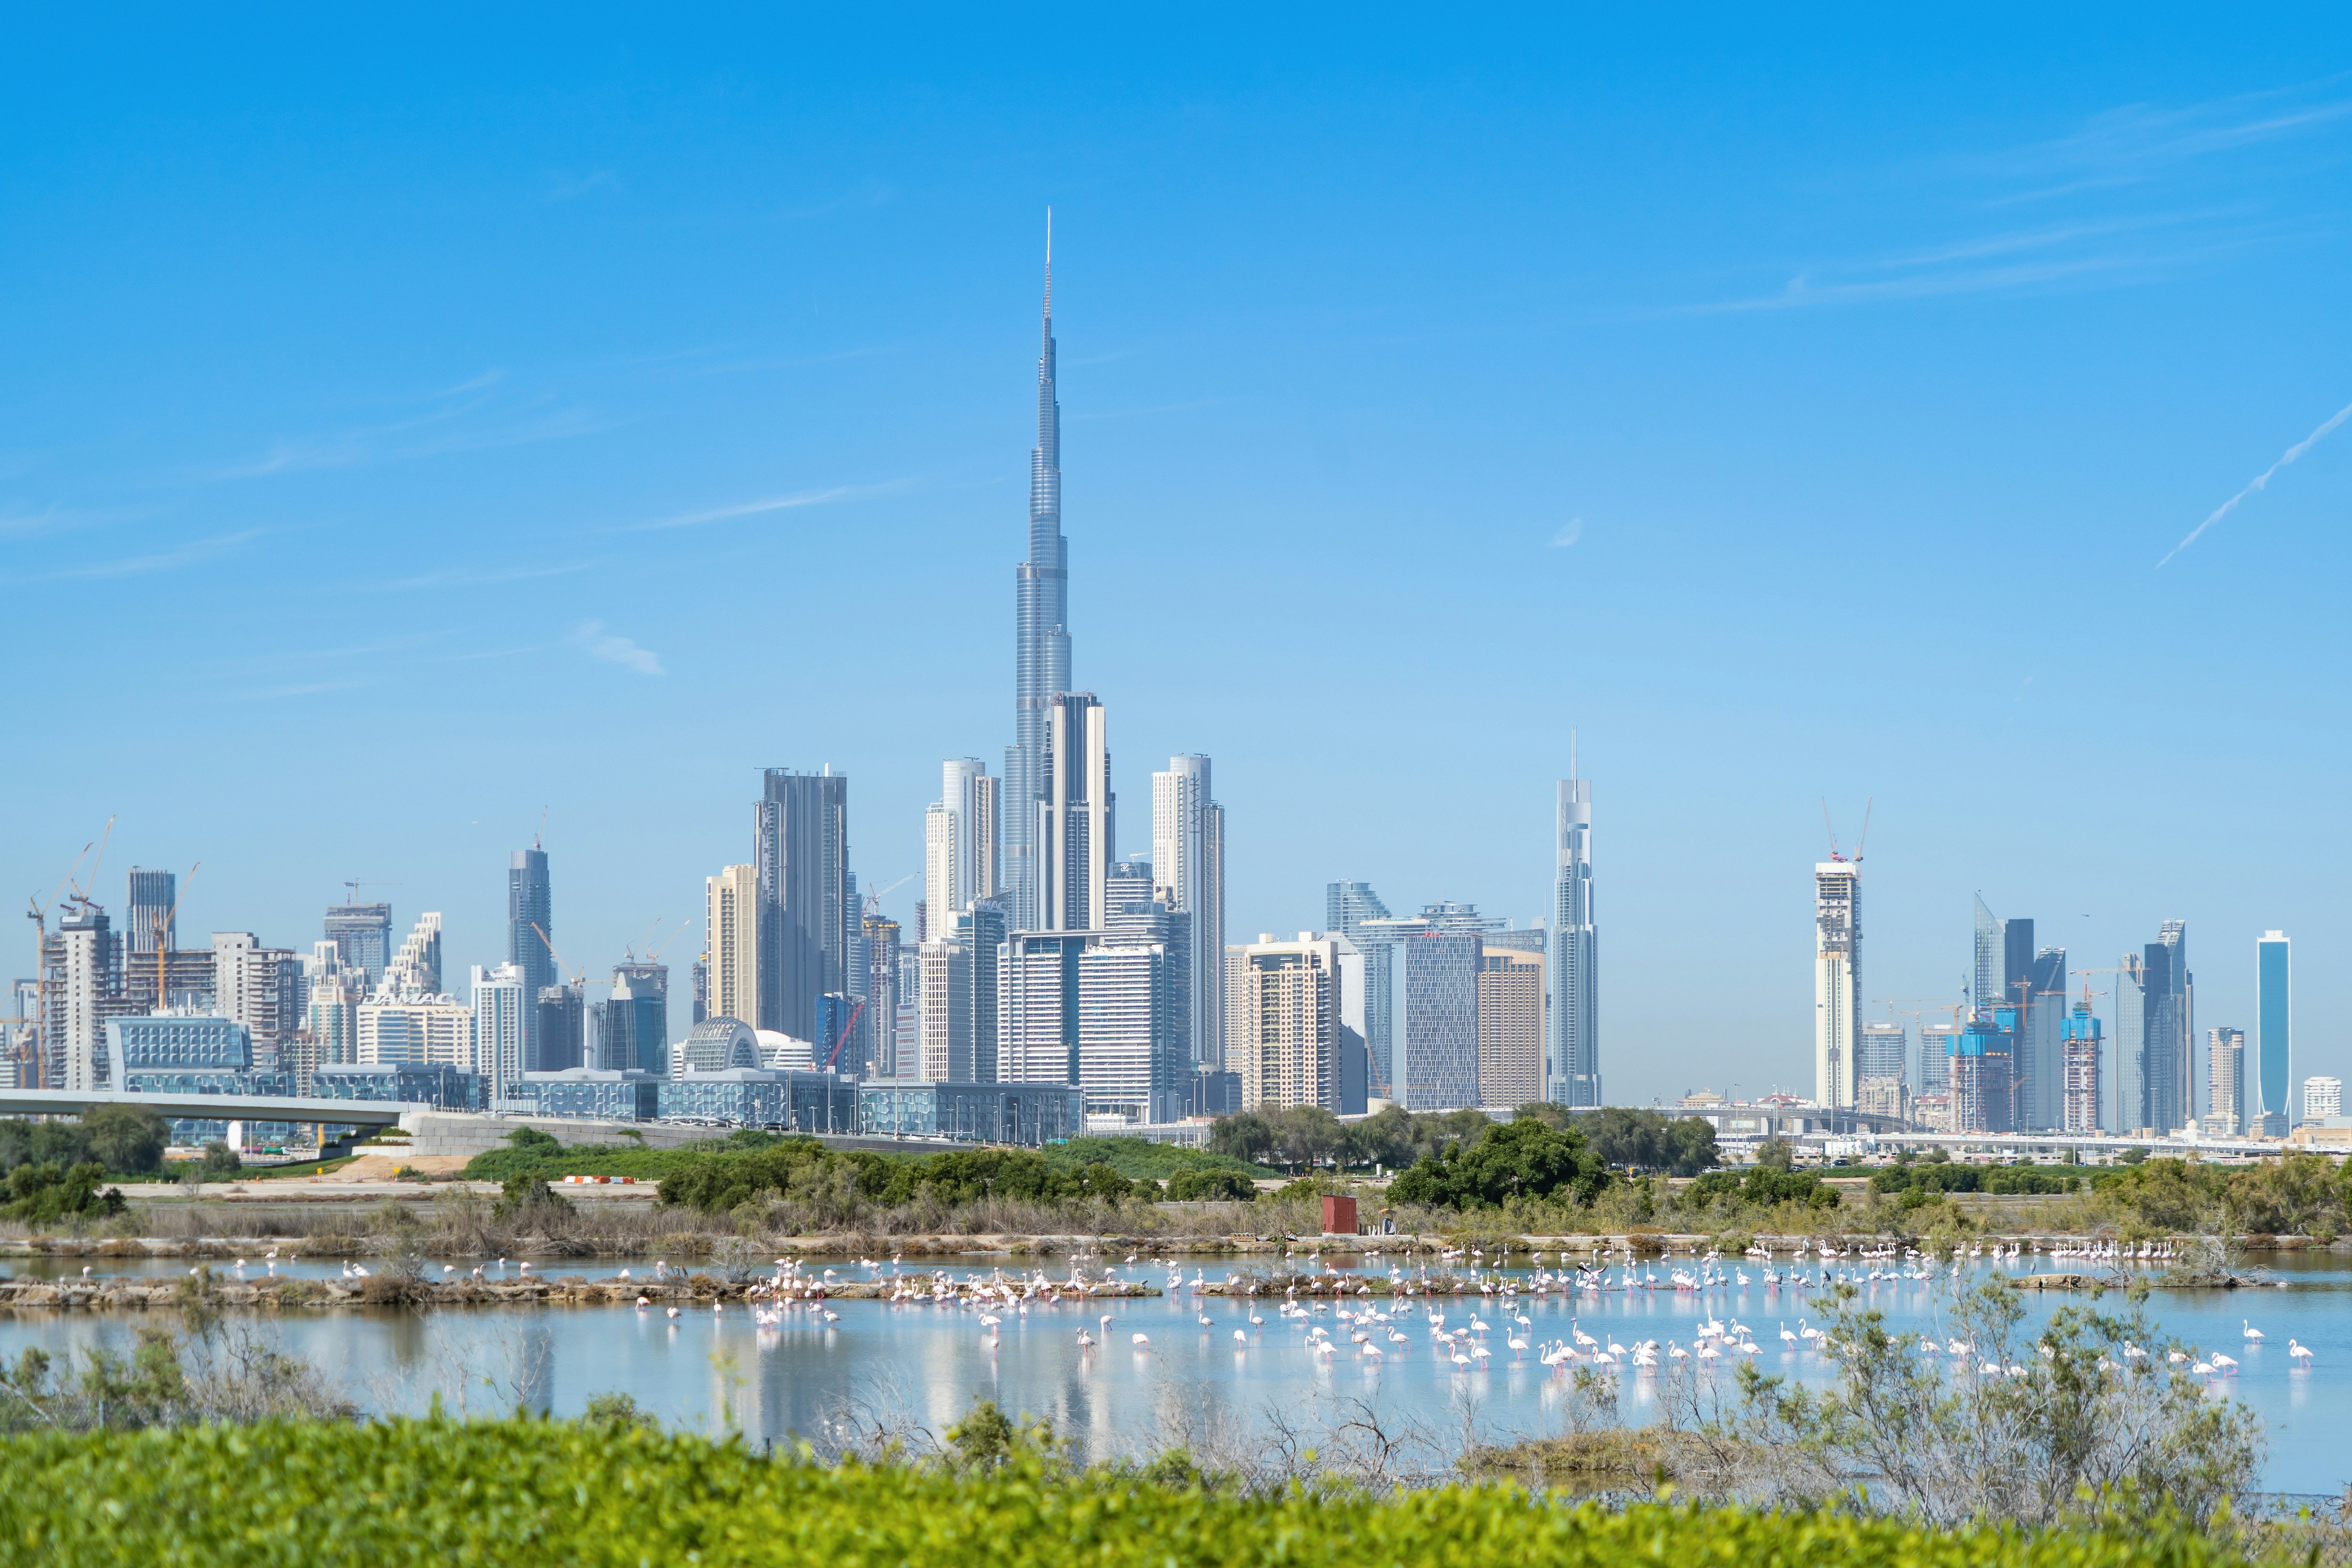 Flamingos in a pond at Ras Al Khor Wildlife Sanctuary with the Dubai skyline in the background